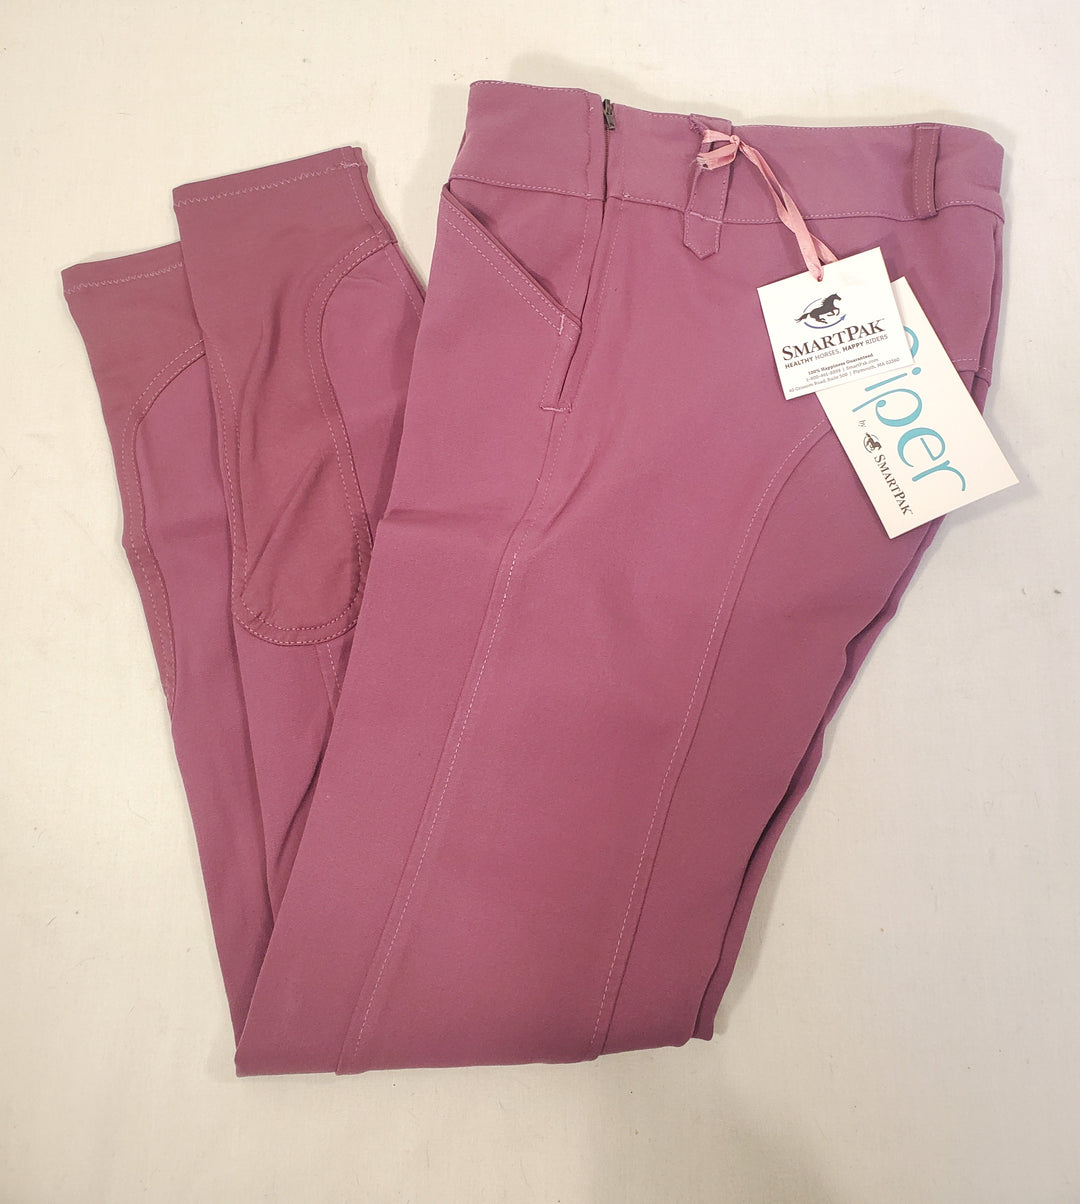 Piper Side Zip Breeches by SmartPak - 26L - New!